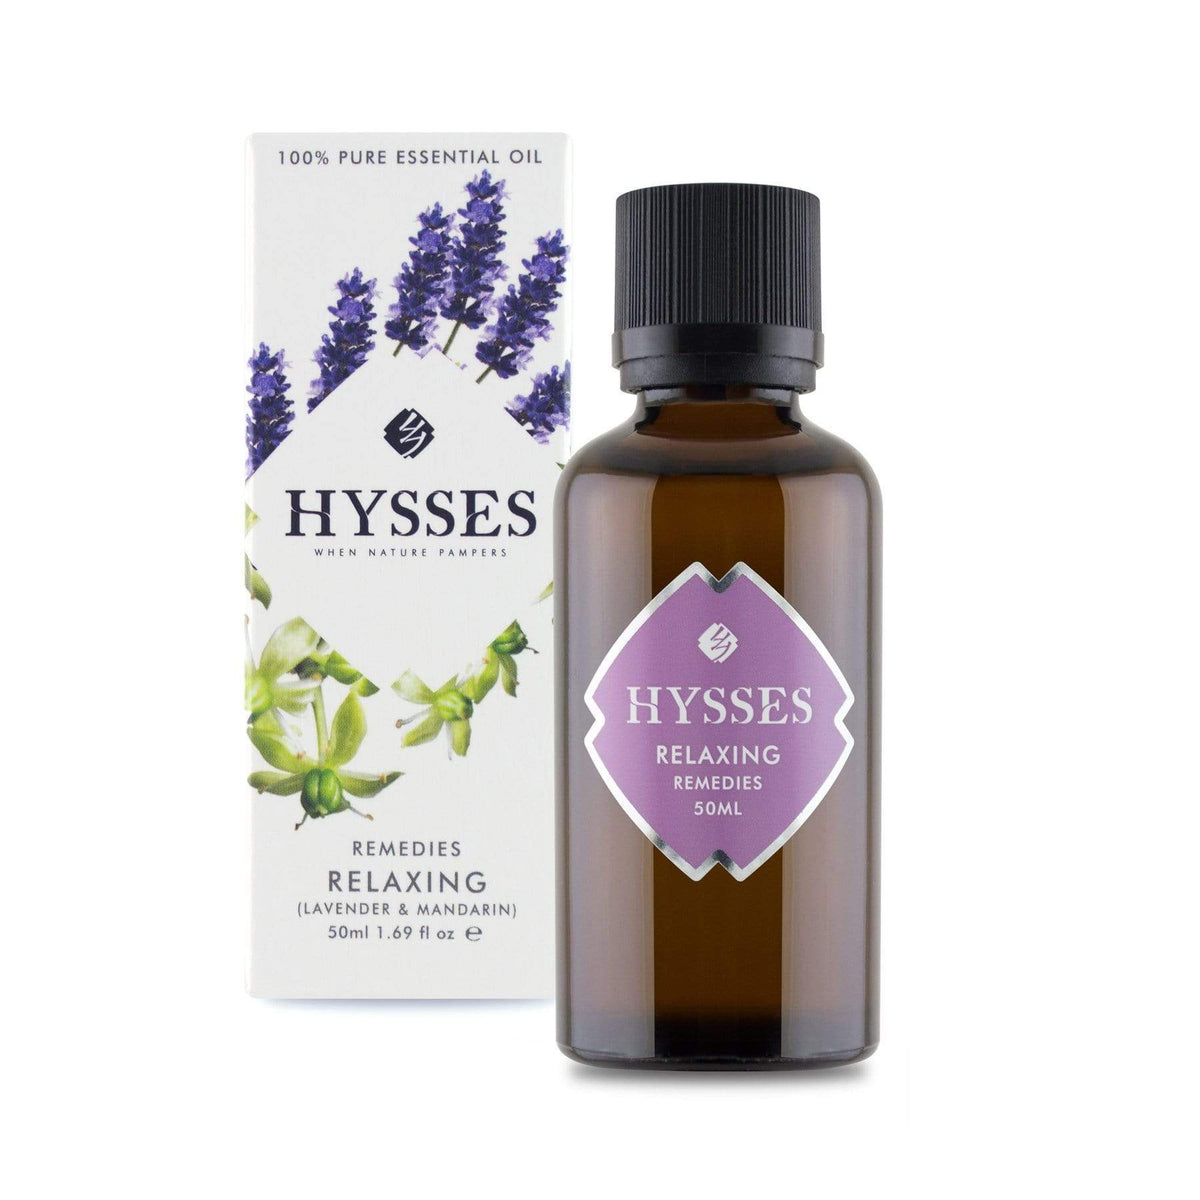 Hysses Essential Oil Remedies, Relaxing